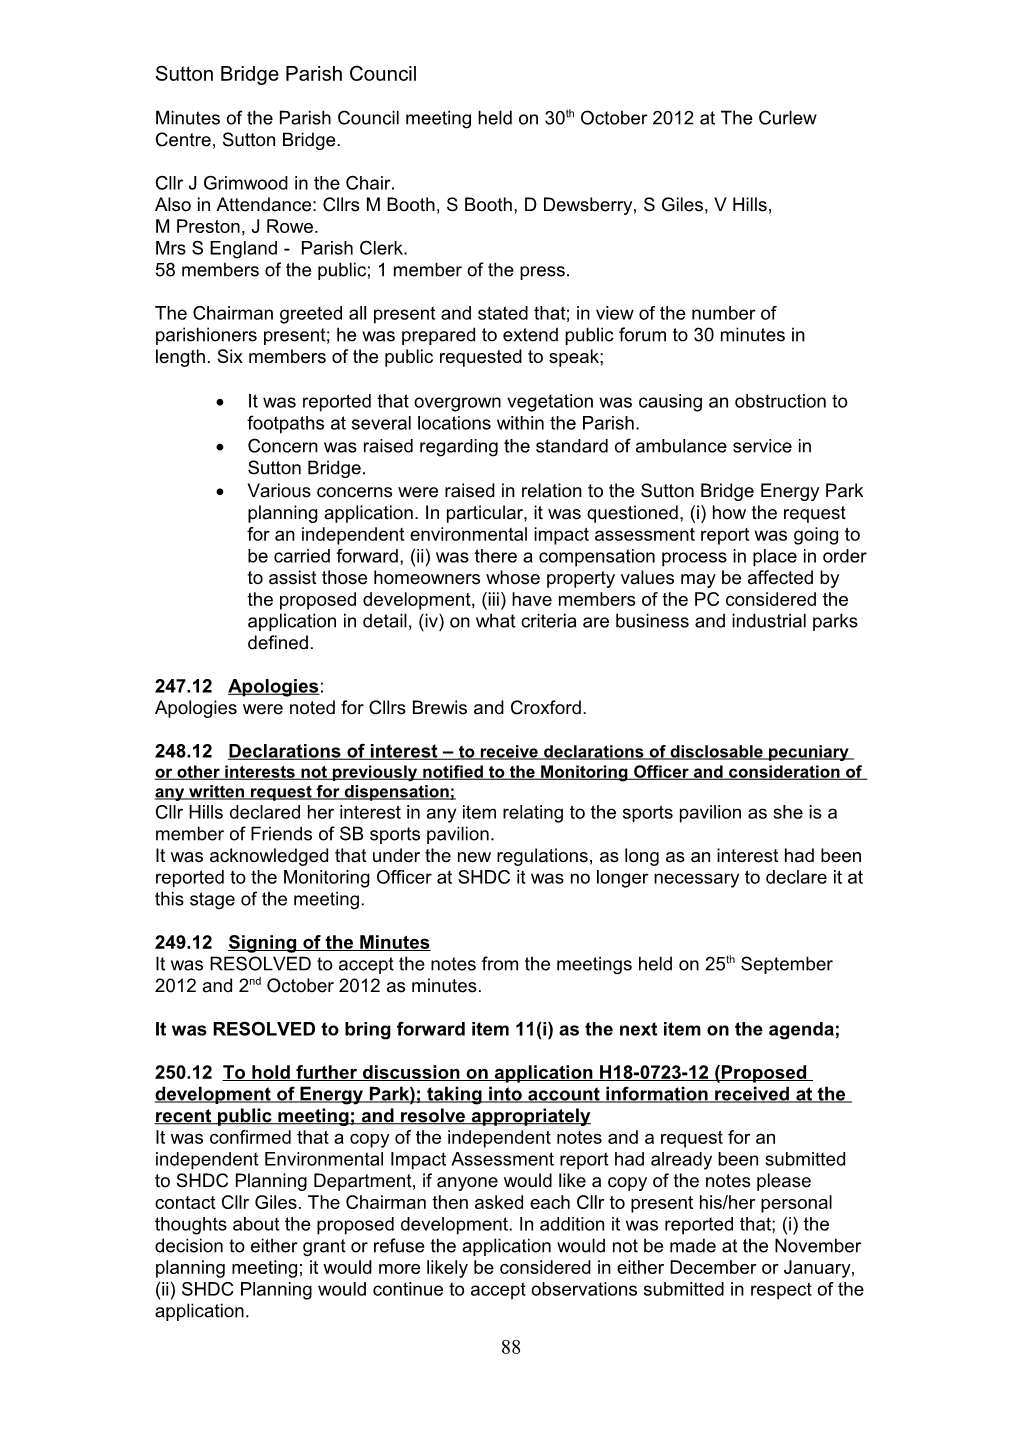 Minutes of the Parish Council Meeting Held on 27Th March 2012 at the Curlew Centre, Sutton s1